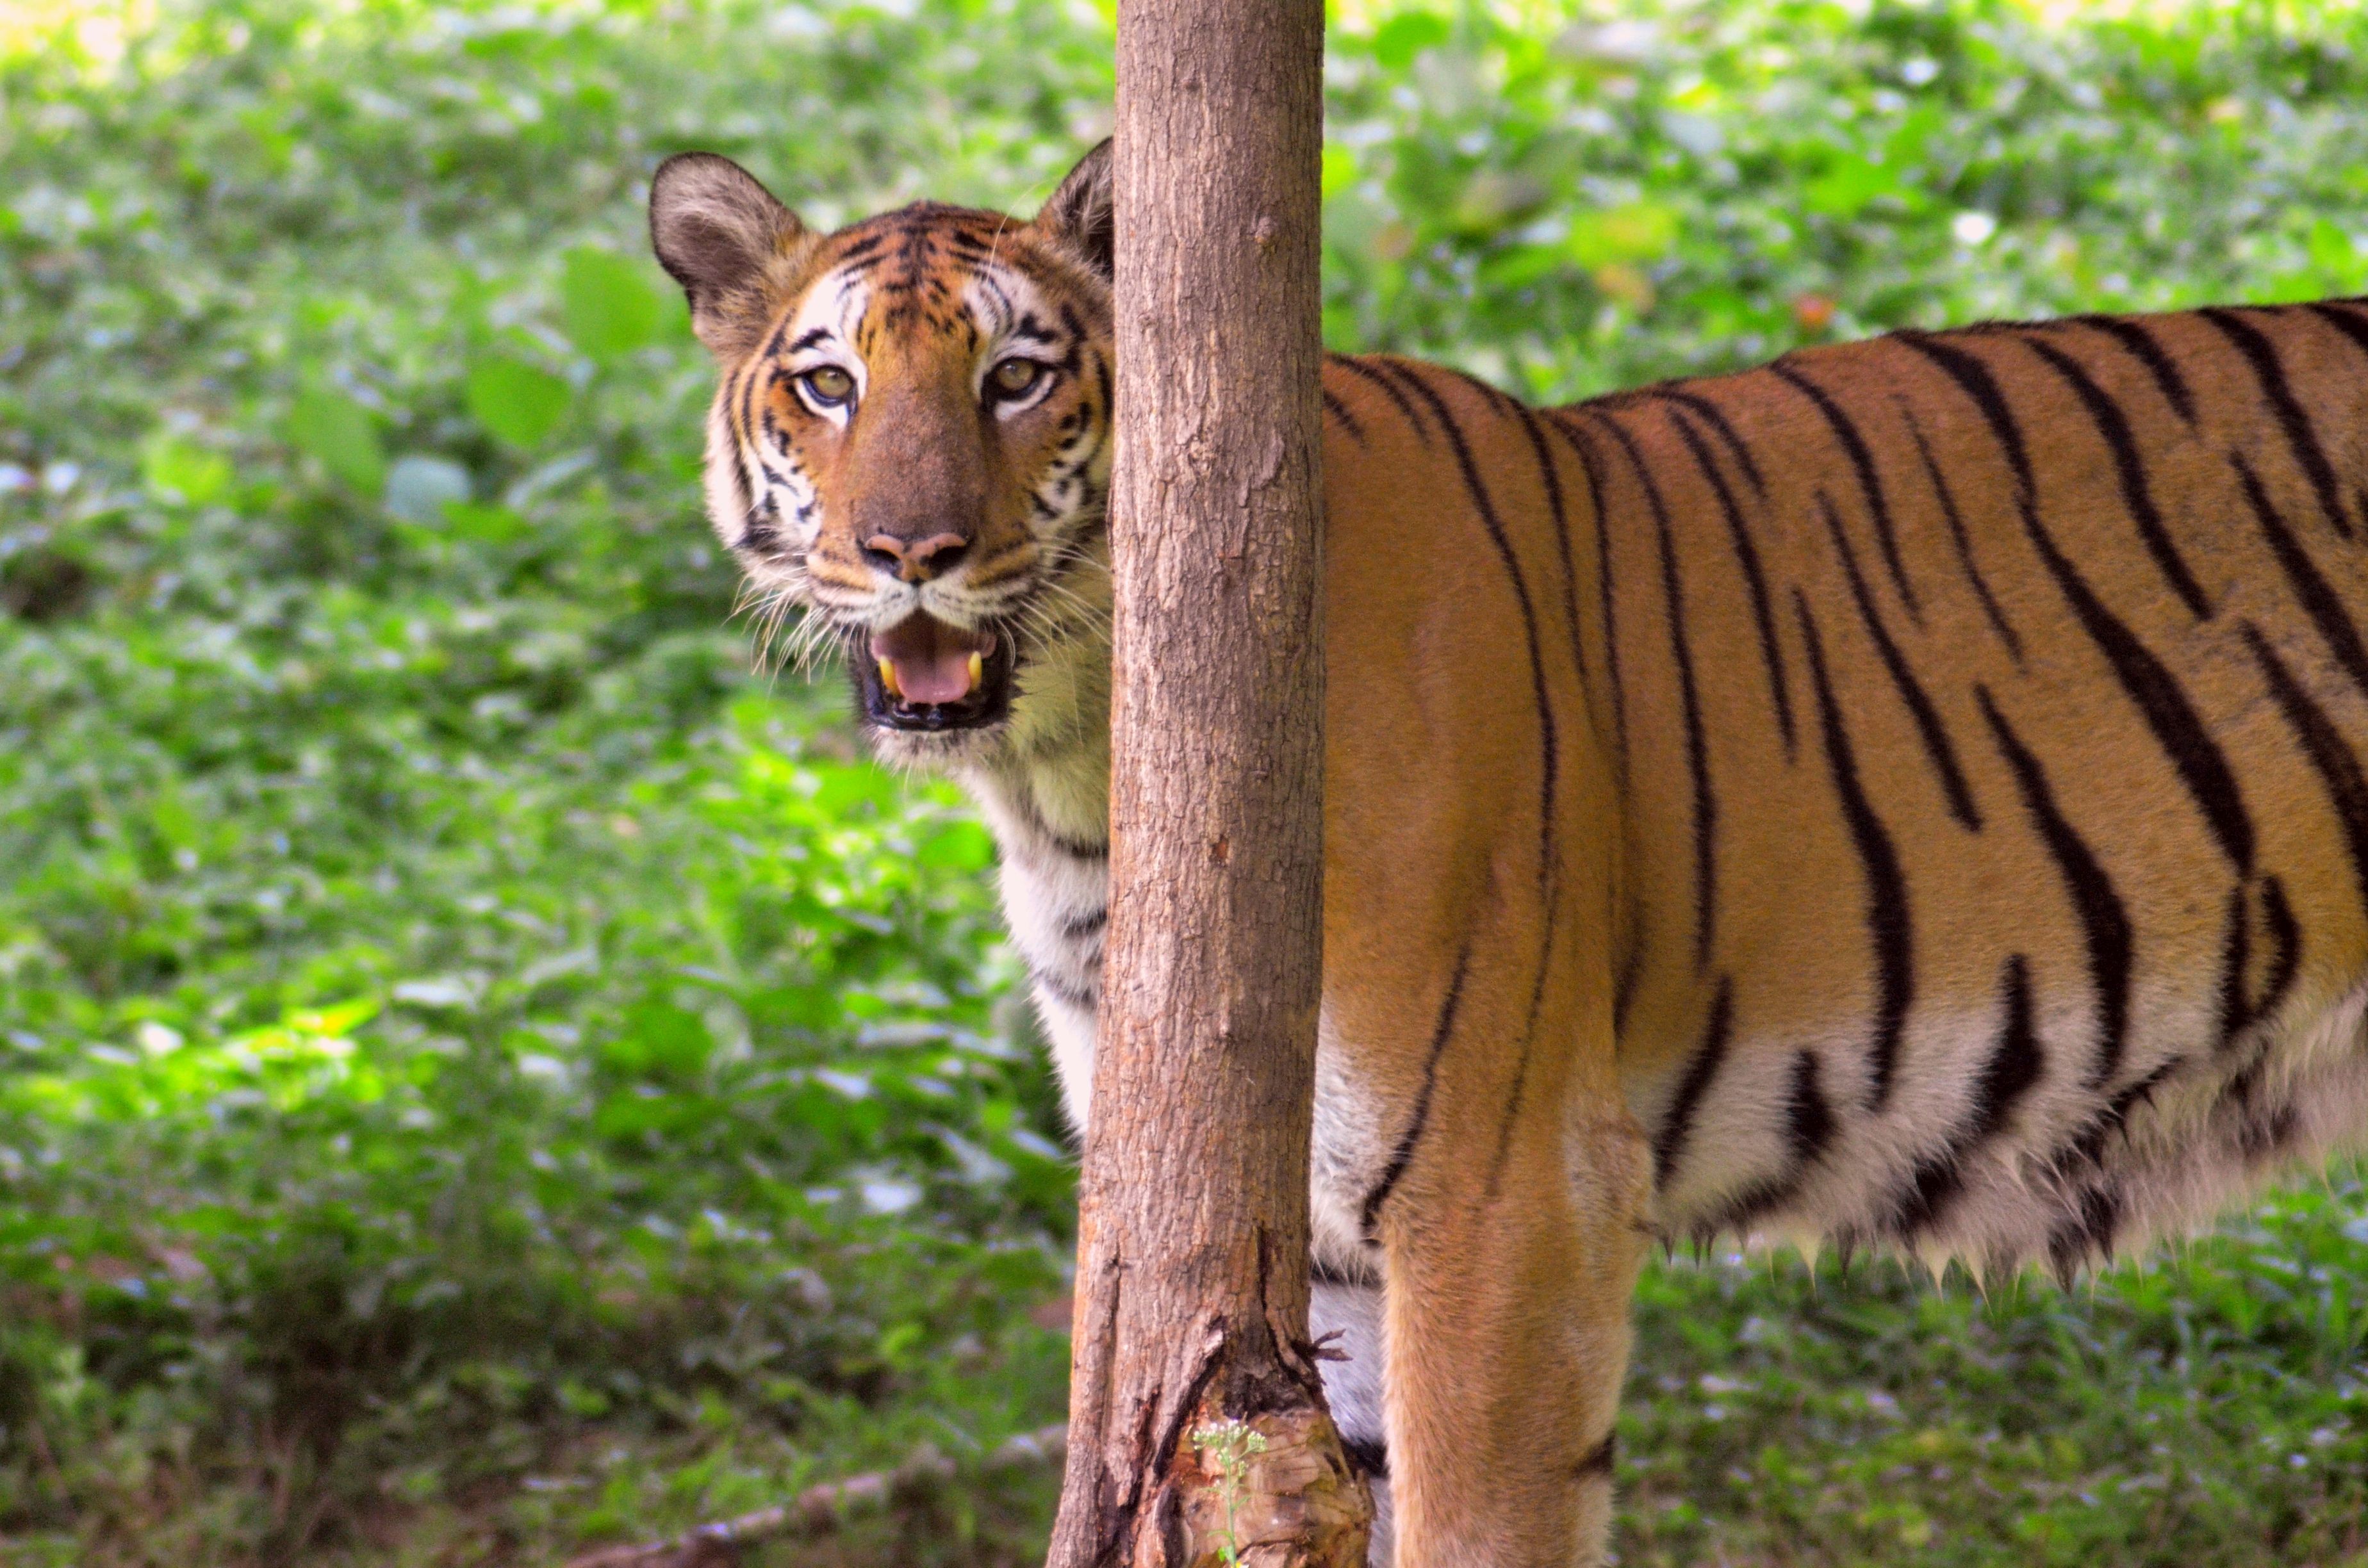 Adopt Cobra For Rs 3,500, Bengal Tiger For Rs 1 Lakh, Leopard For Rs 35,000  At Bengaluru Zoo